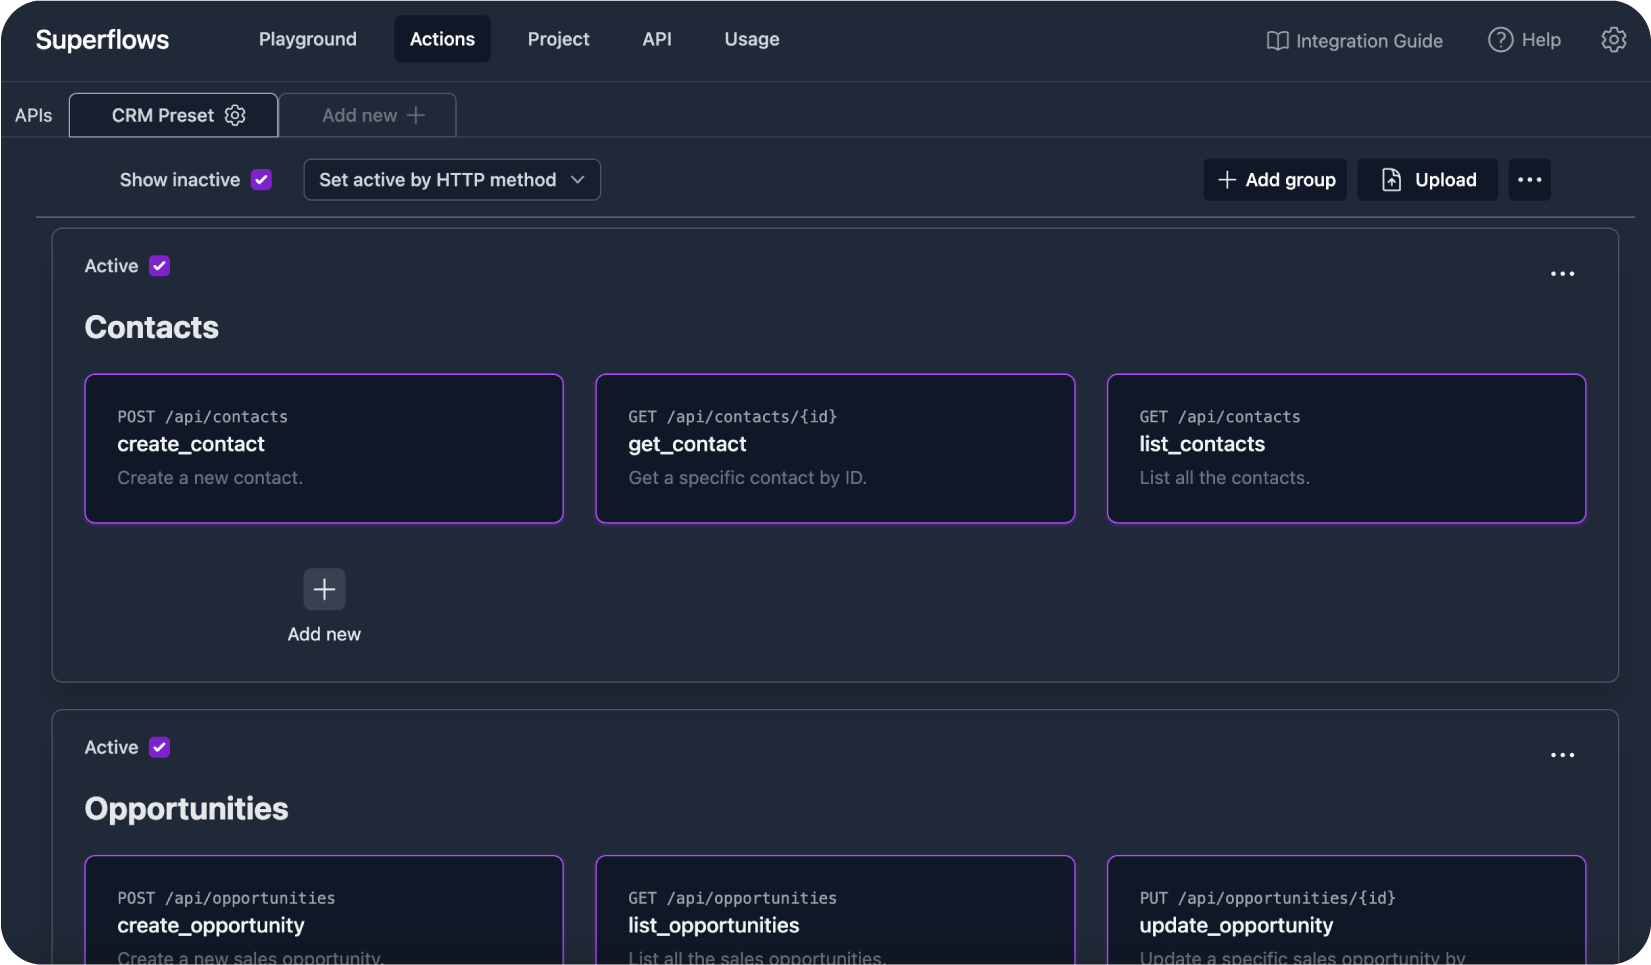 Superflows actions page